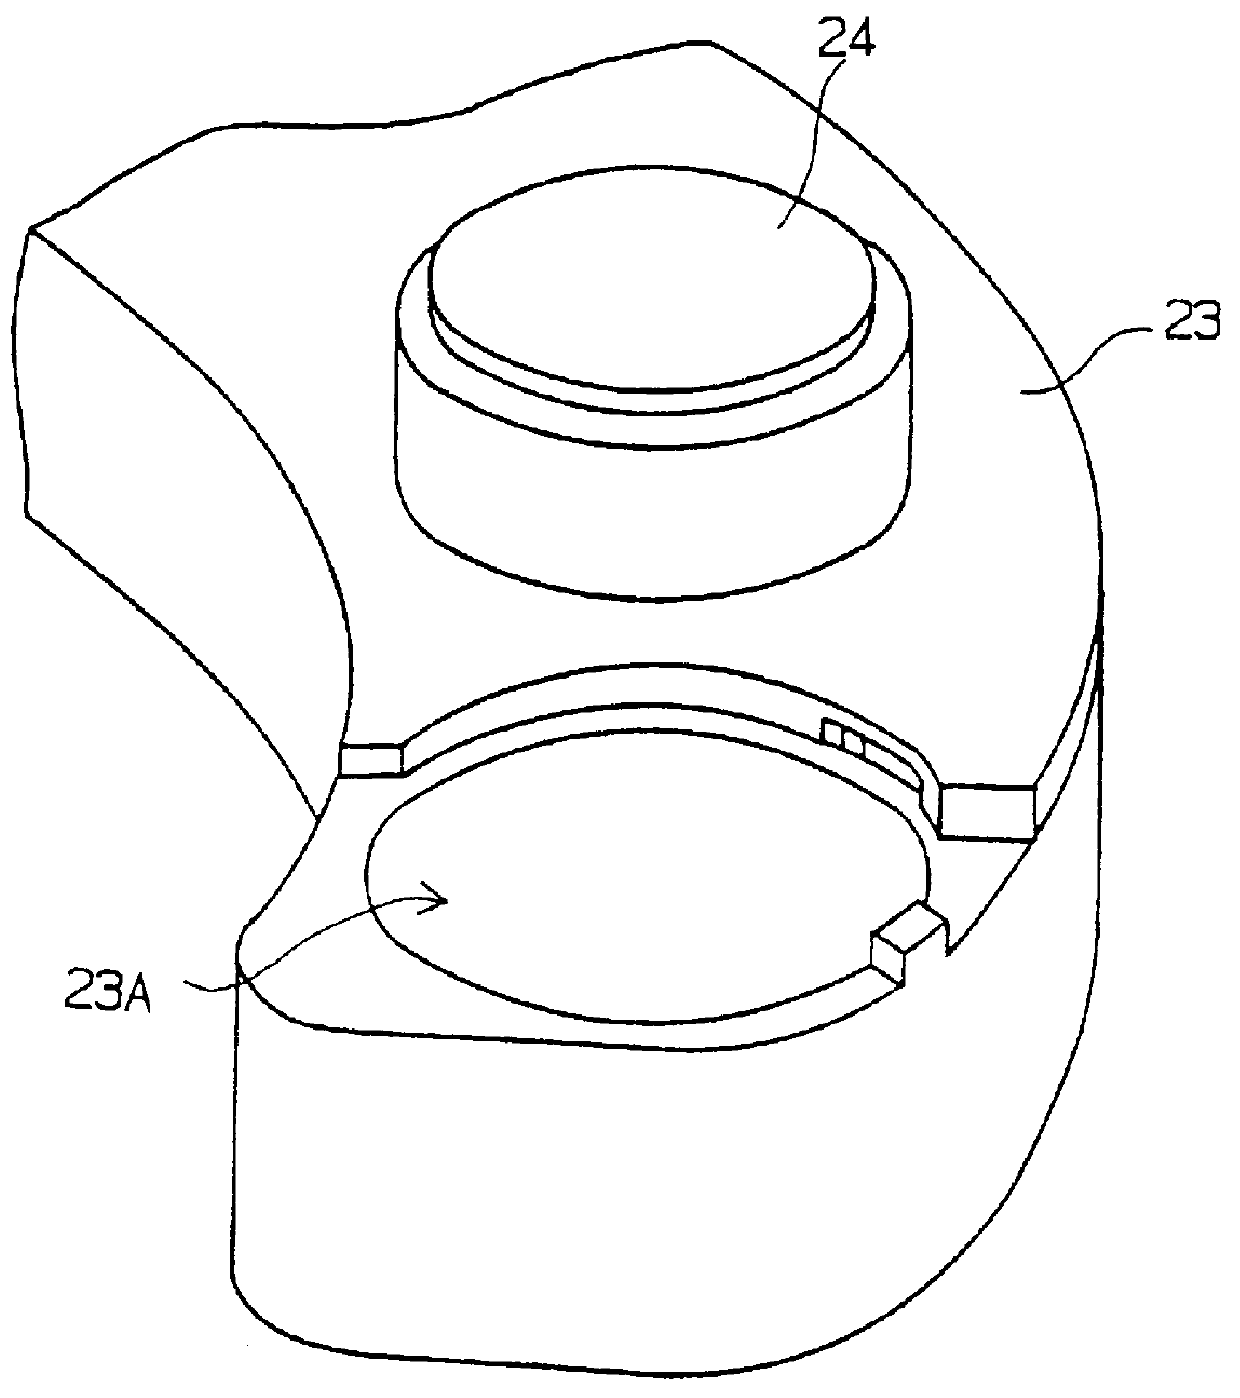 Battery receiving chamber and hearing aid